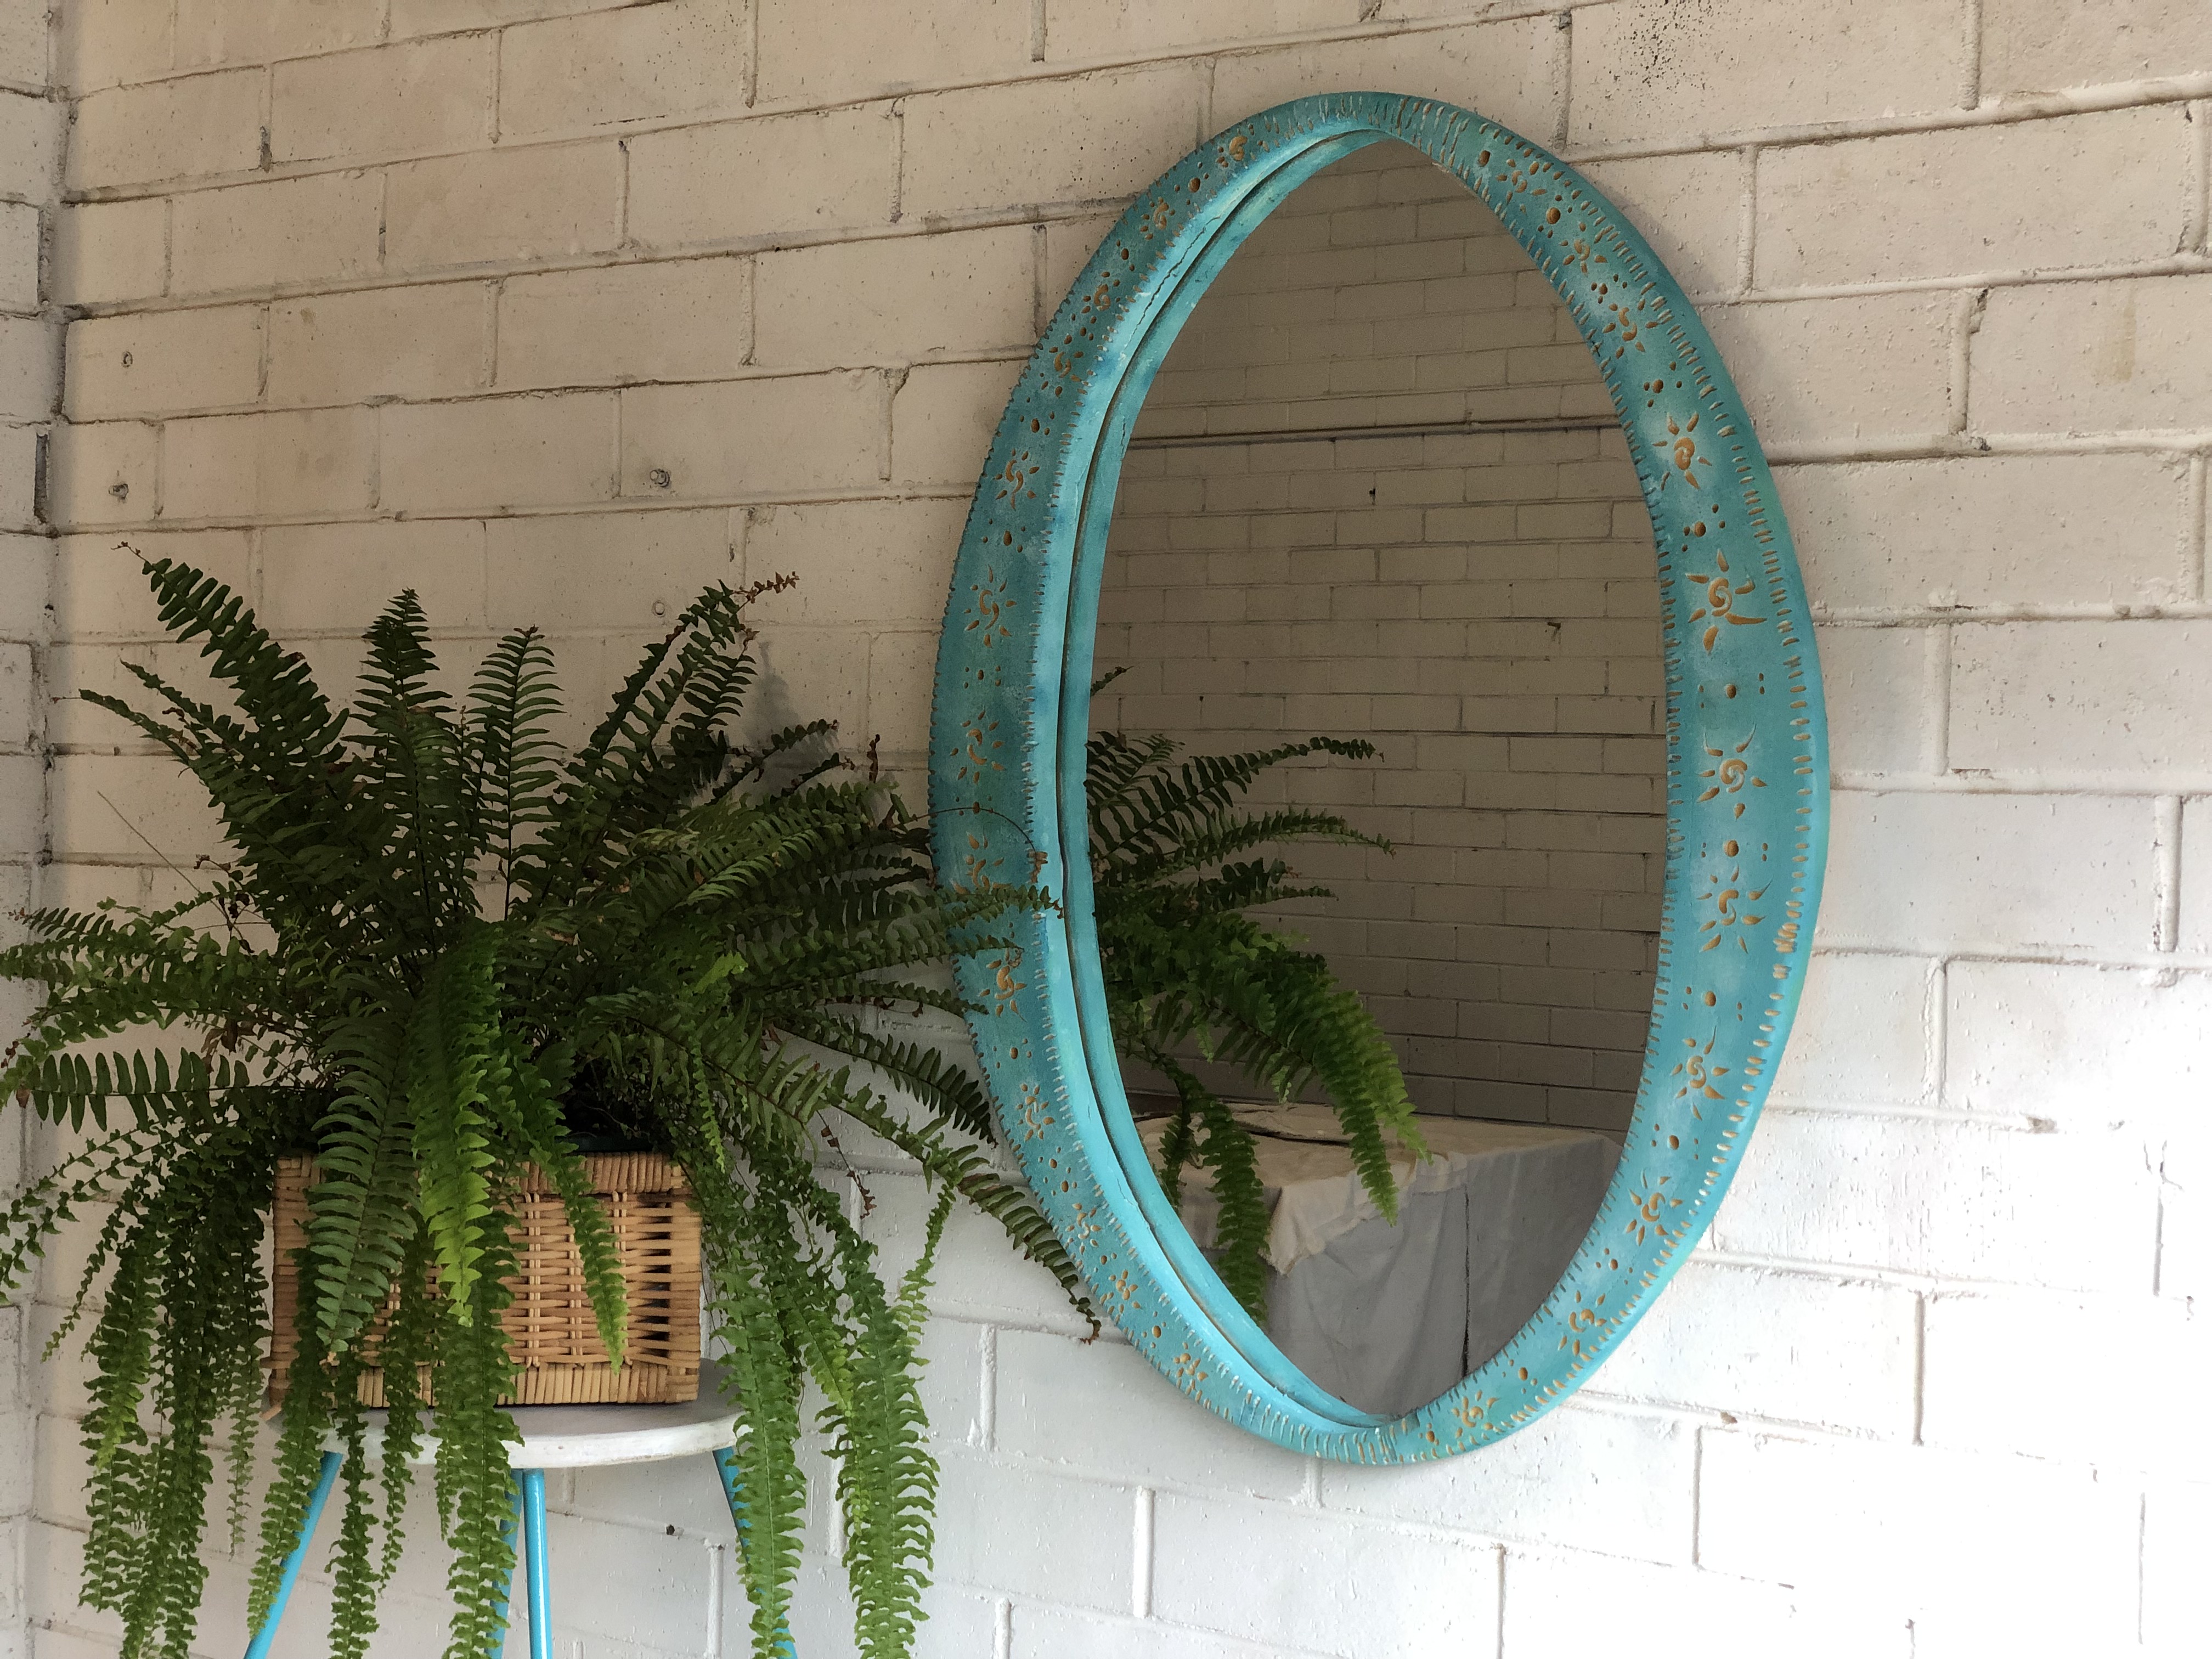 On a white, brick wall hangs a mirror with an ornate blue frame. On the left a fern sits on top of a stool